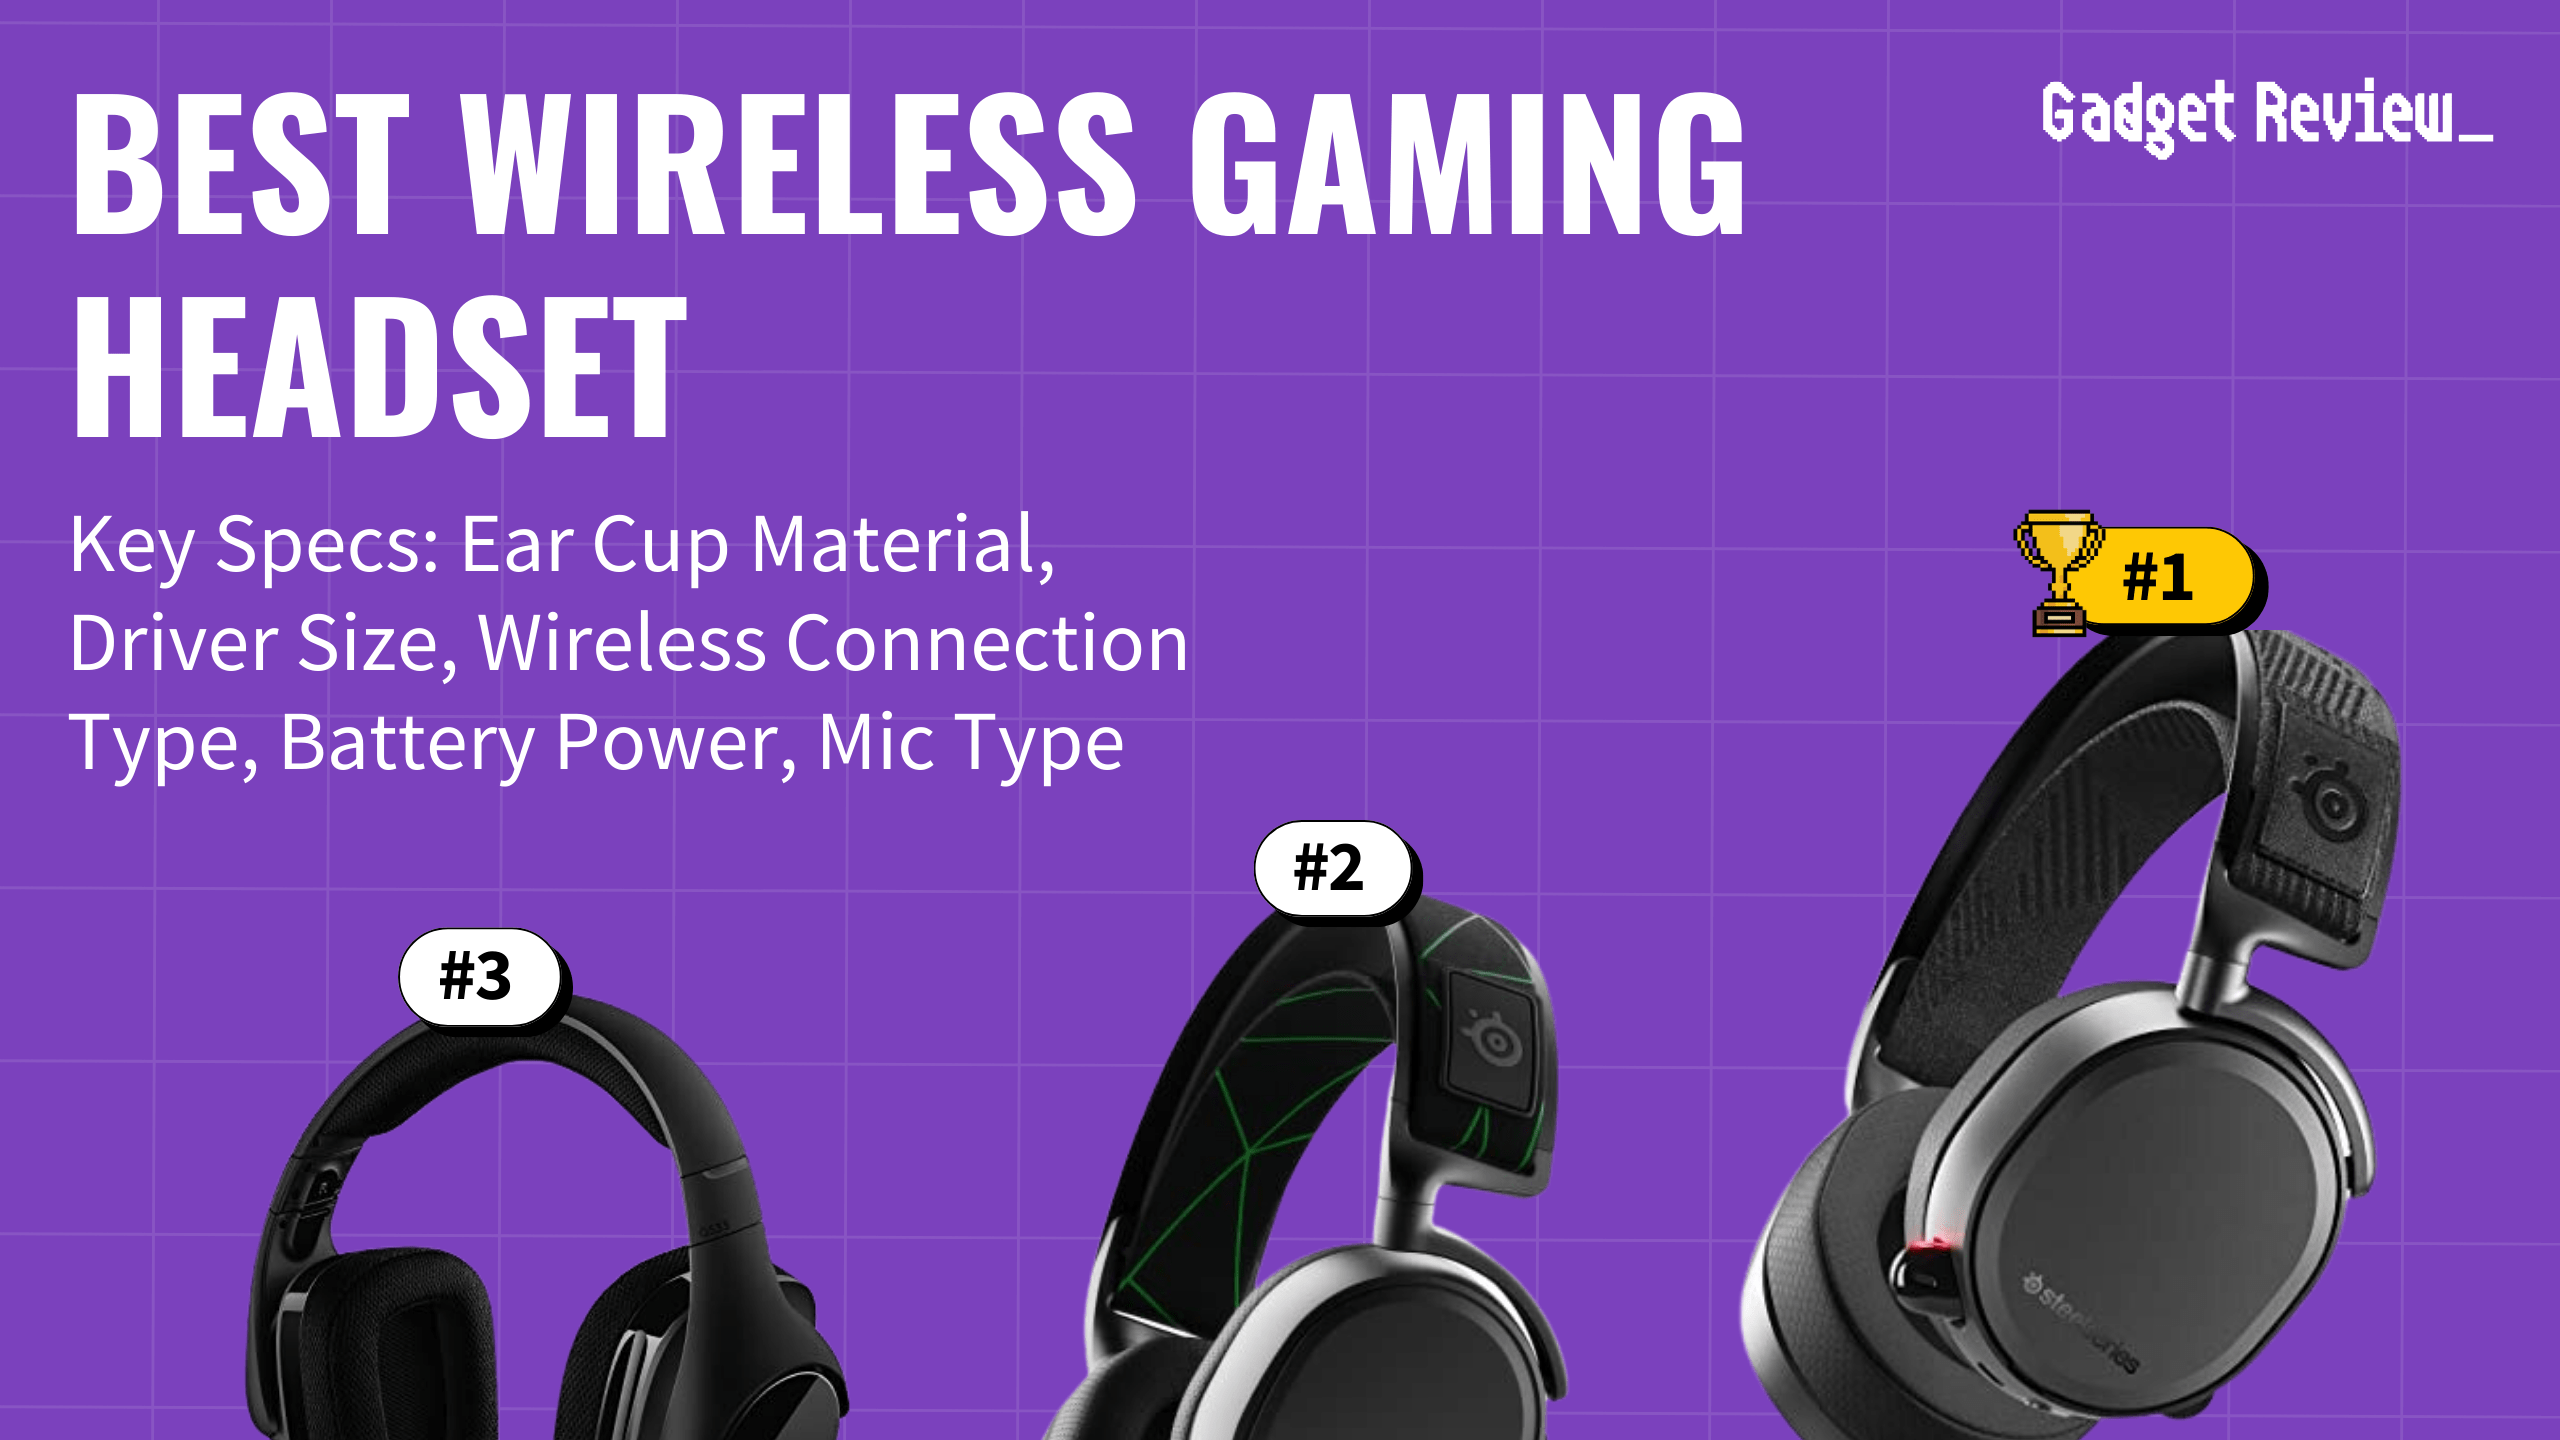 Best Wireless Gaming Headset Reviewed